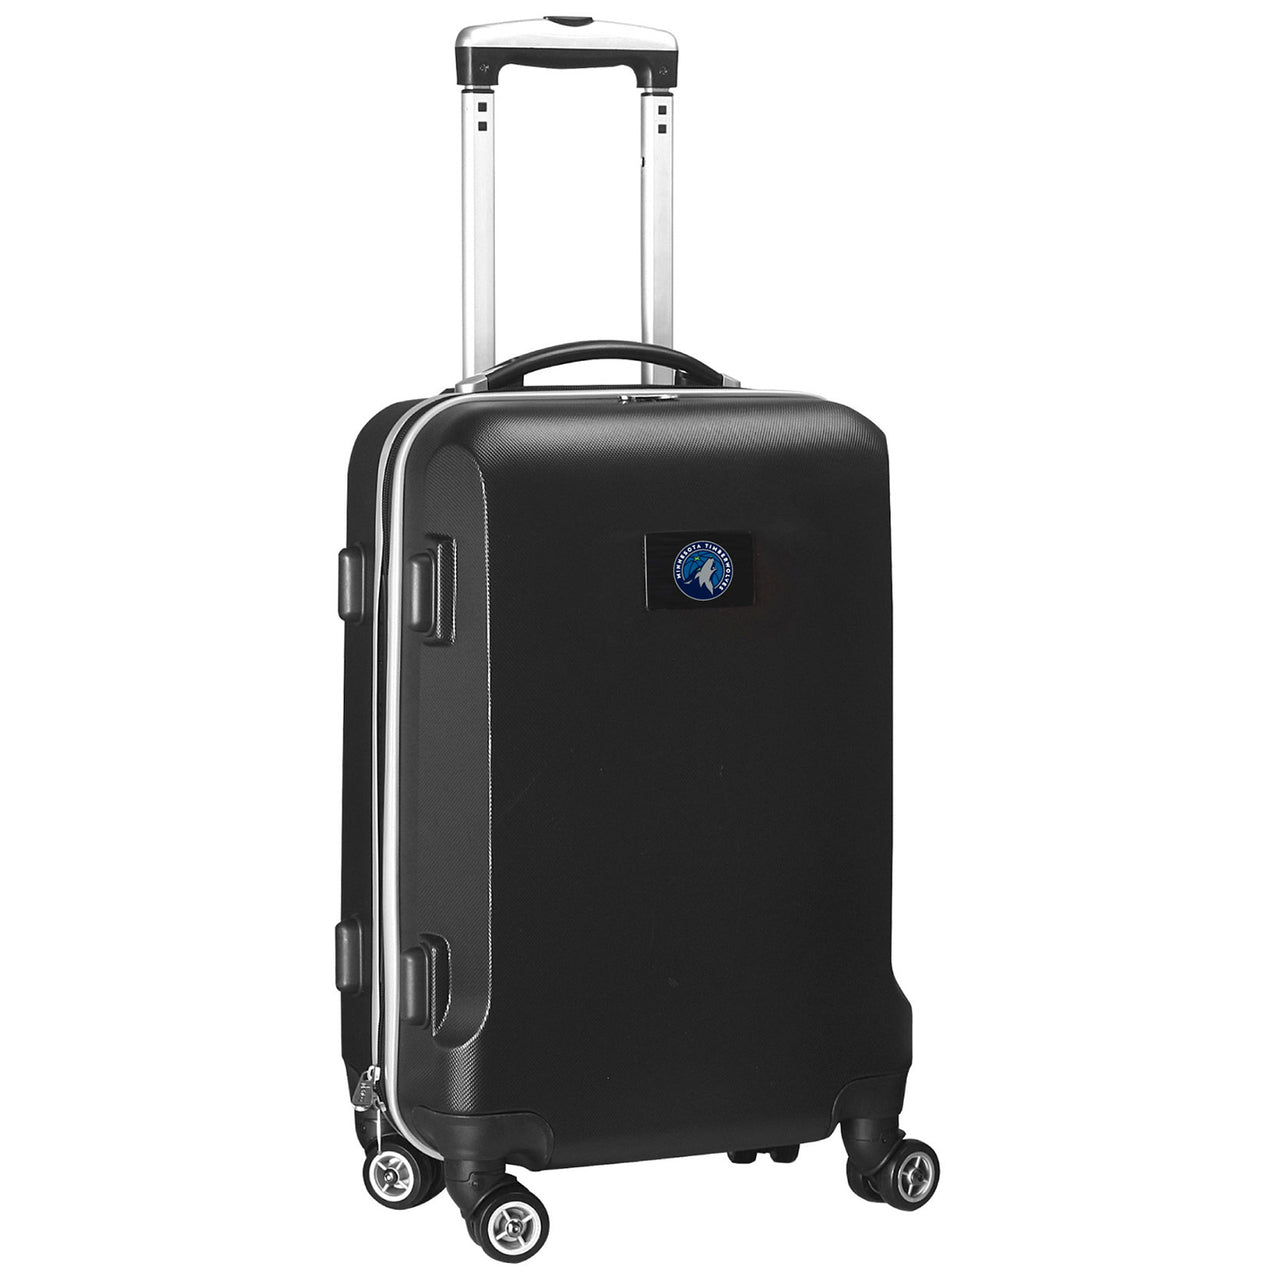 20" Hardcase Luggage Carry-on Spinner in Black